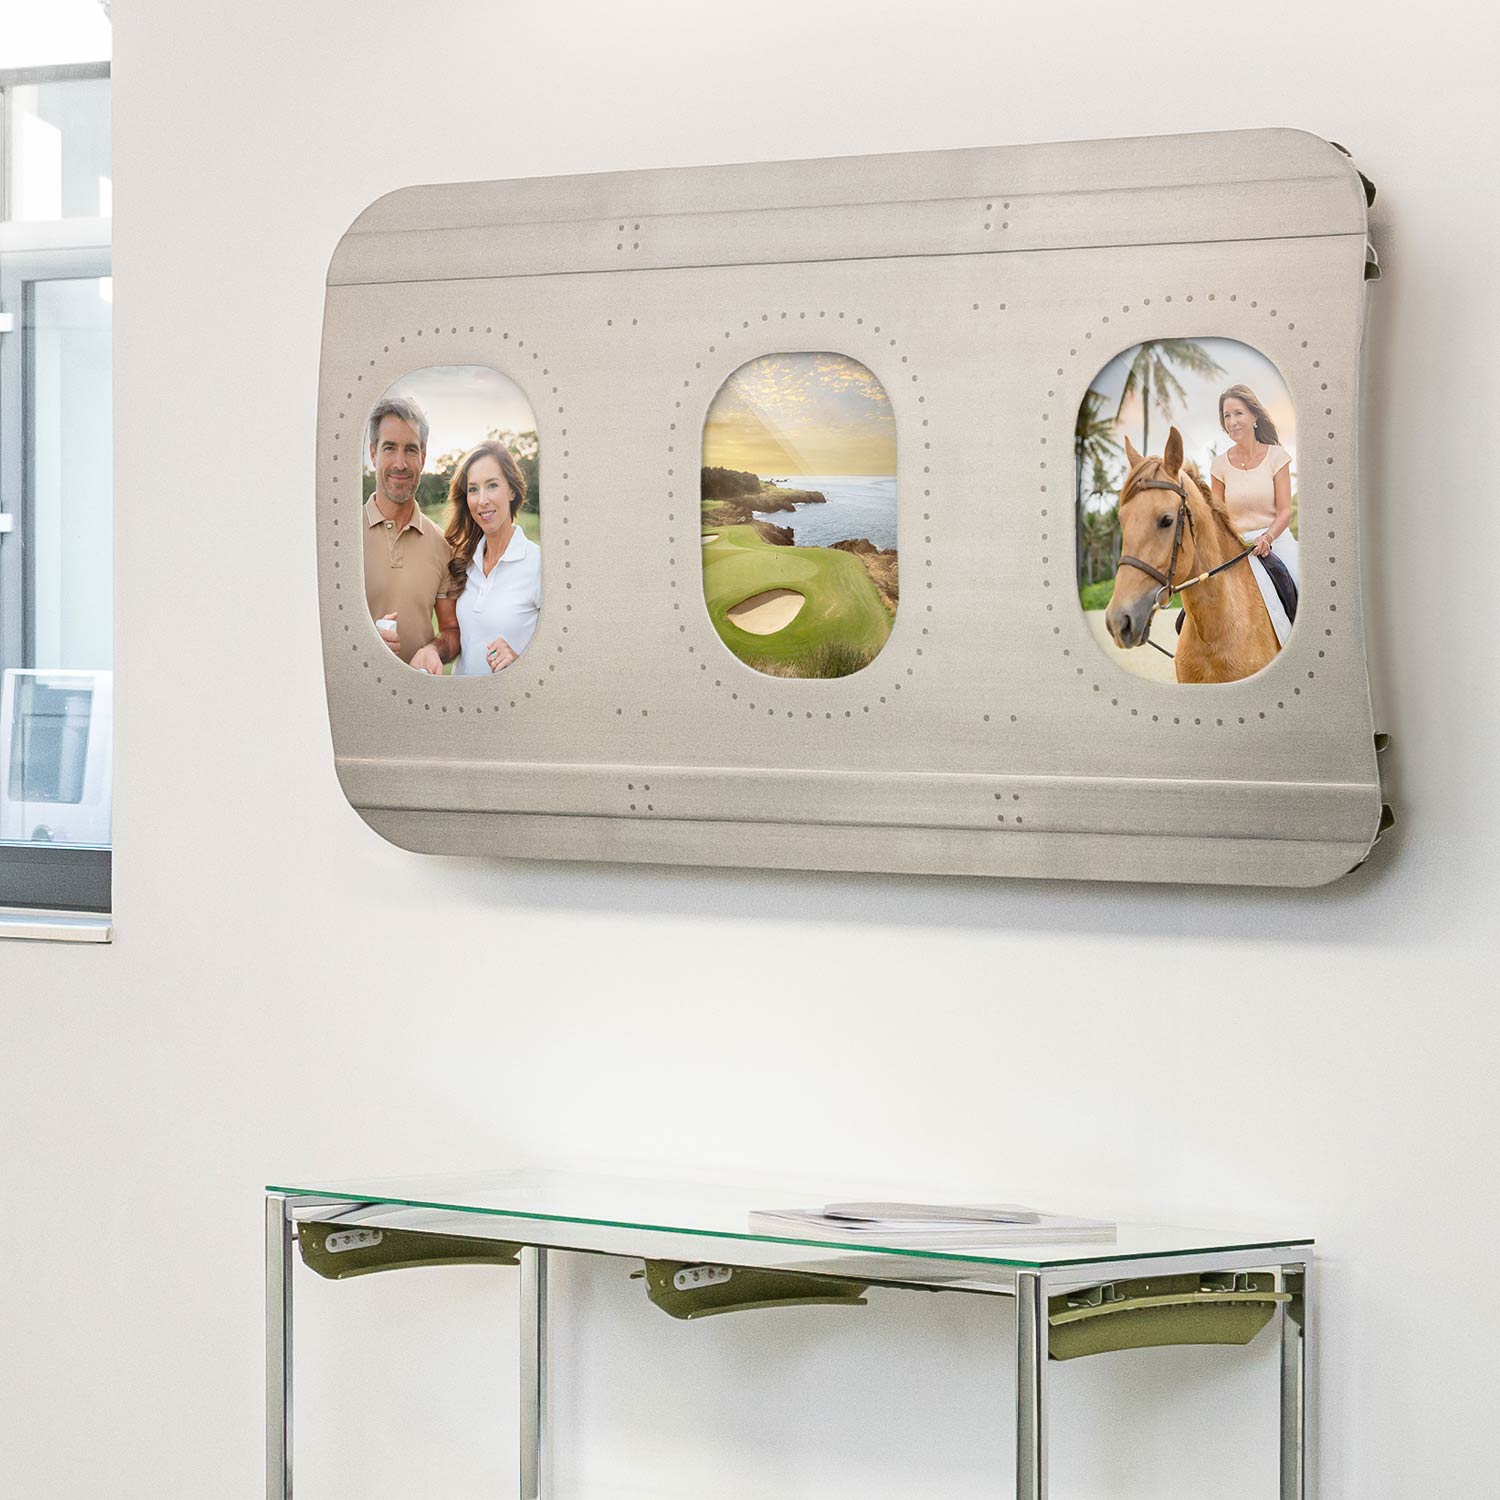 Original MCDonnell Douglas MD-80 Trio Airplane Window Picture Frame Brushed Aluminum